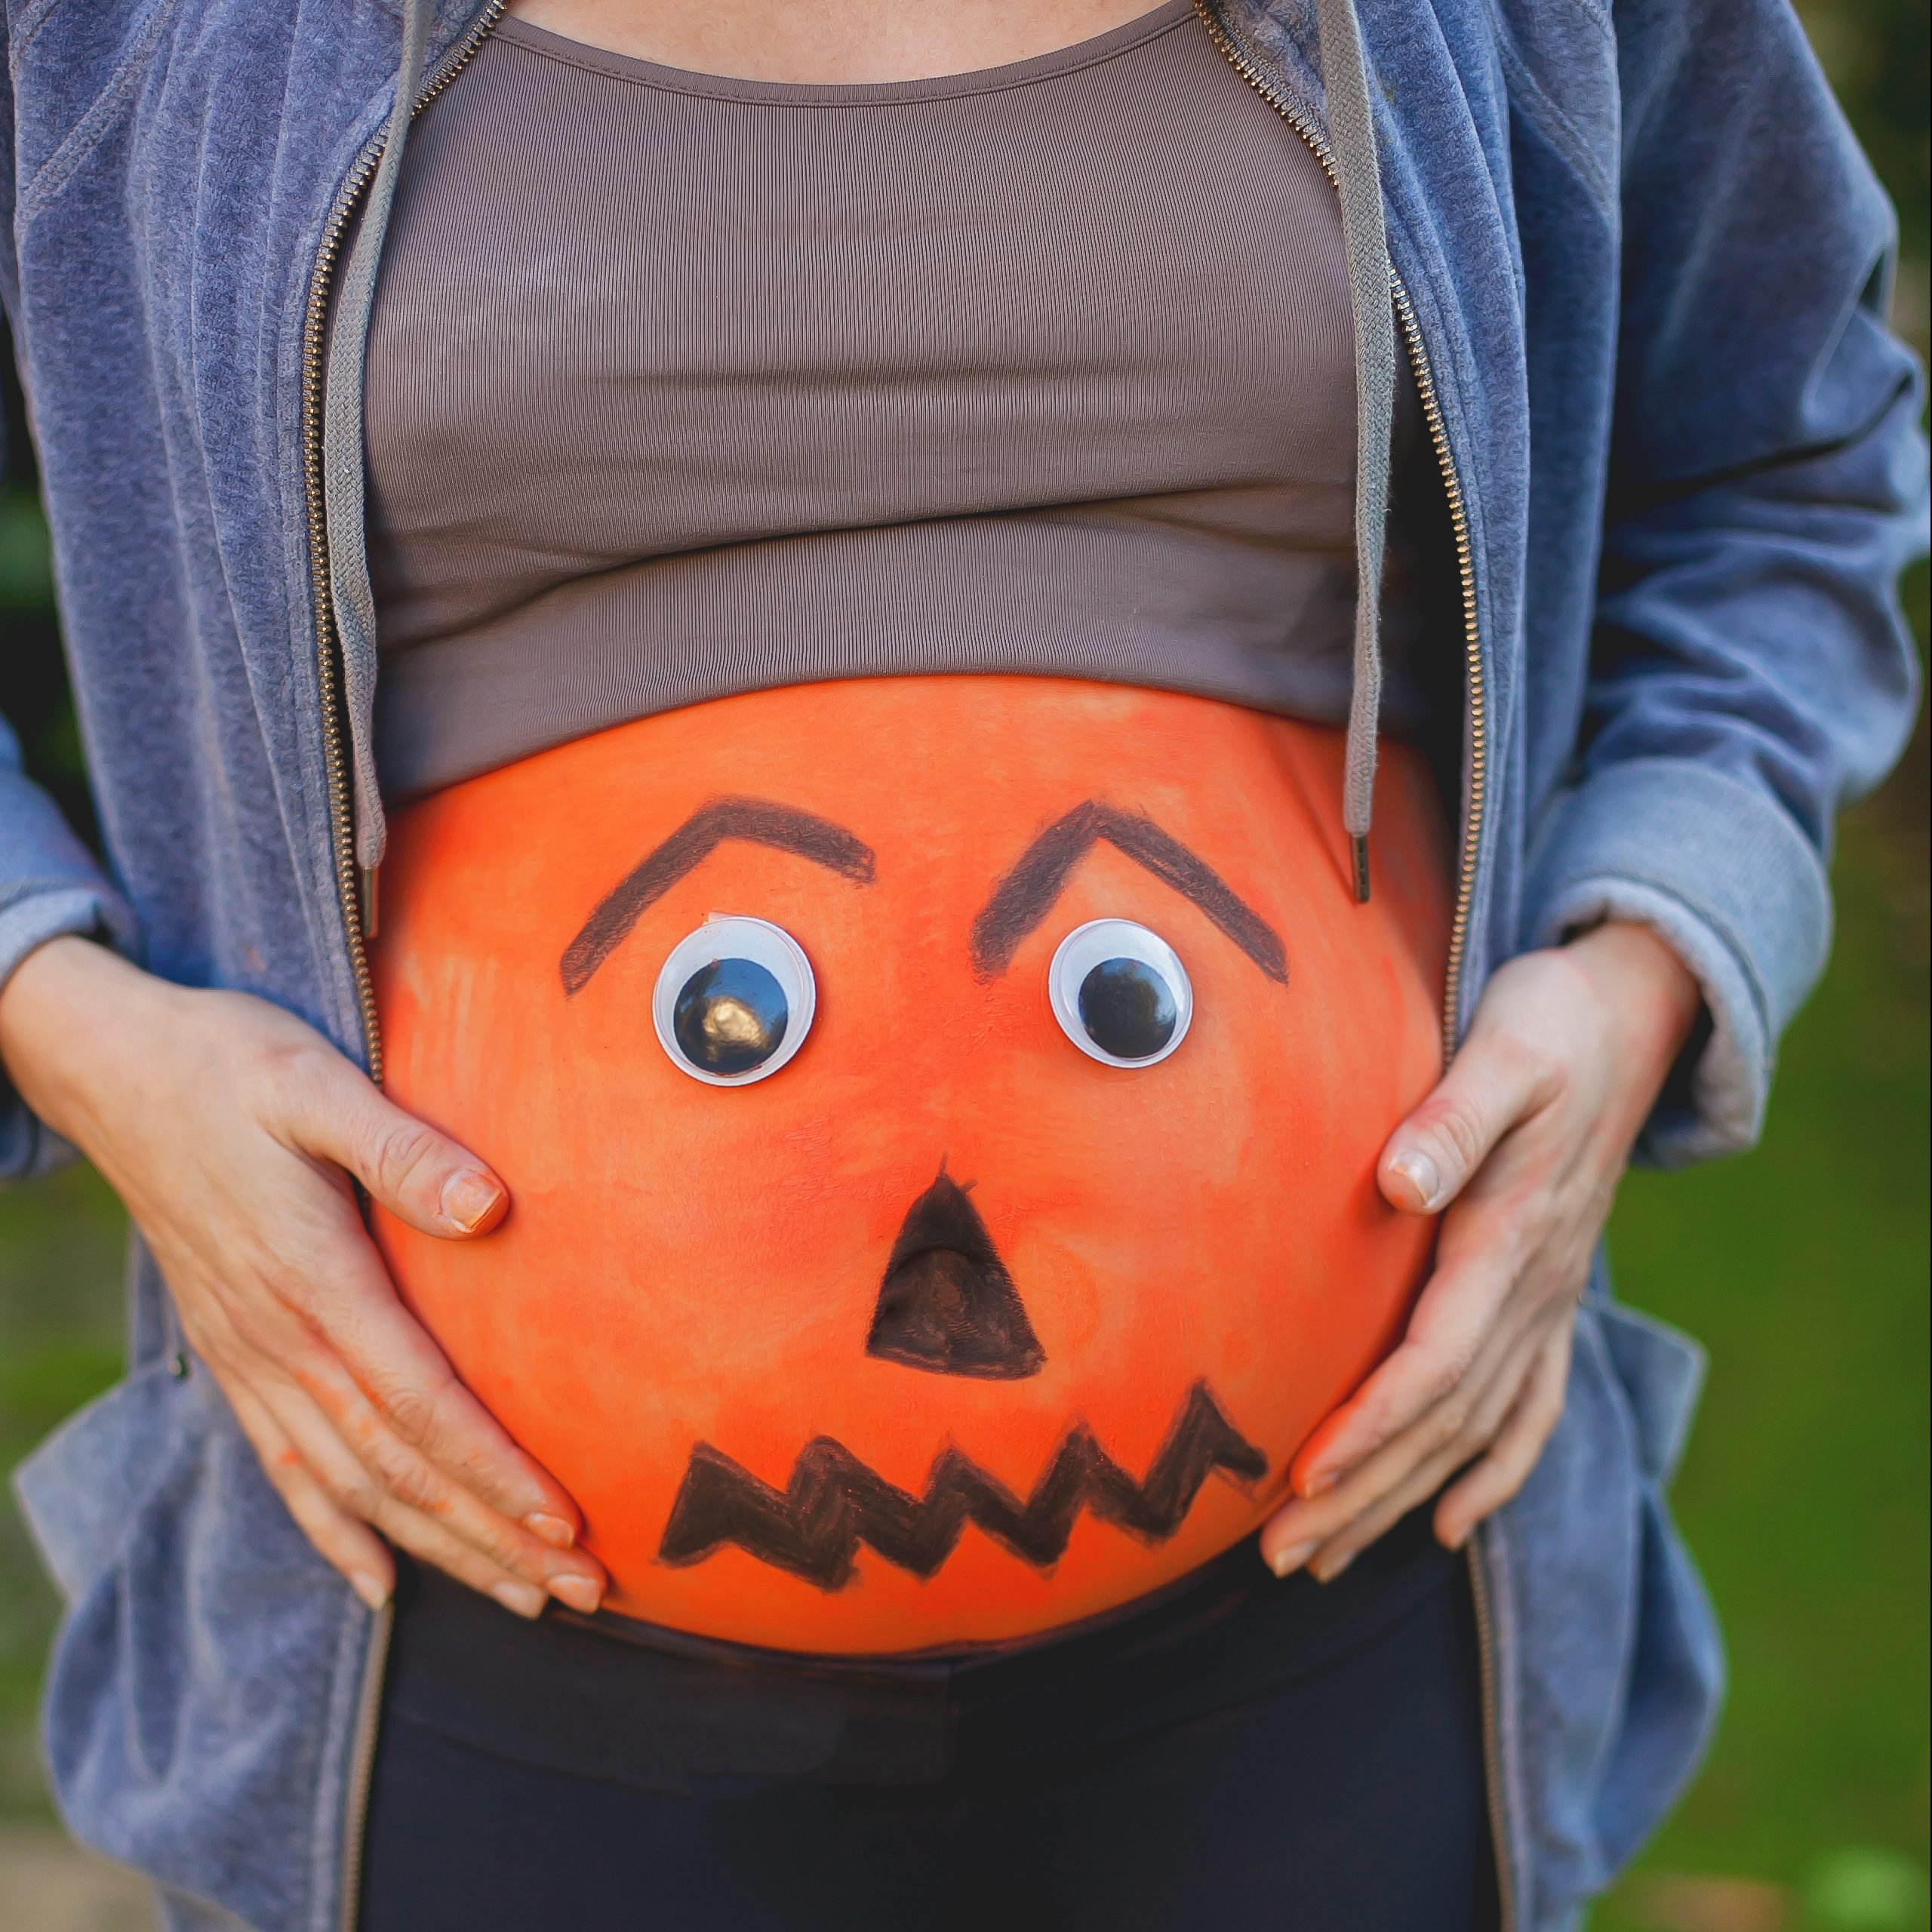 Halloween costume on a pregnant woman